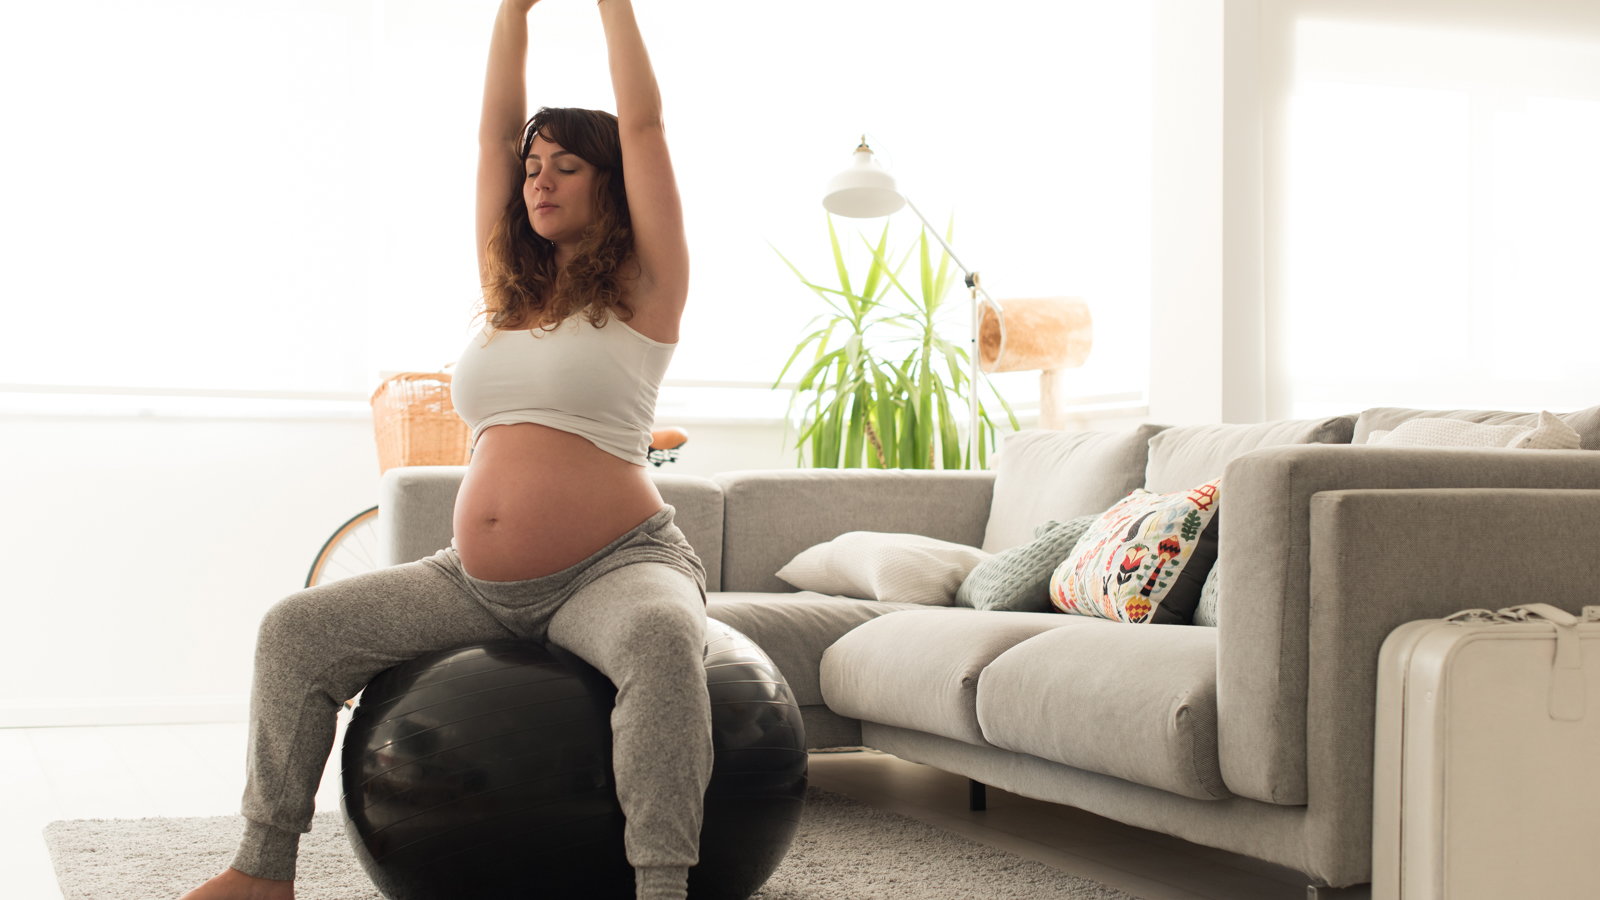 pregnant woman stretching on exercise ball